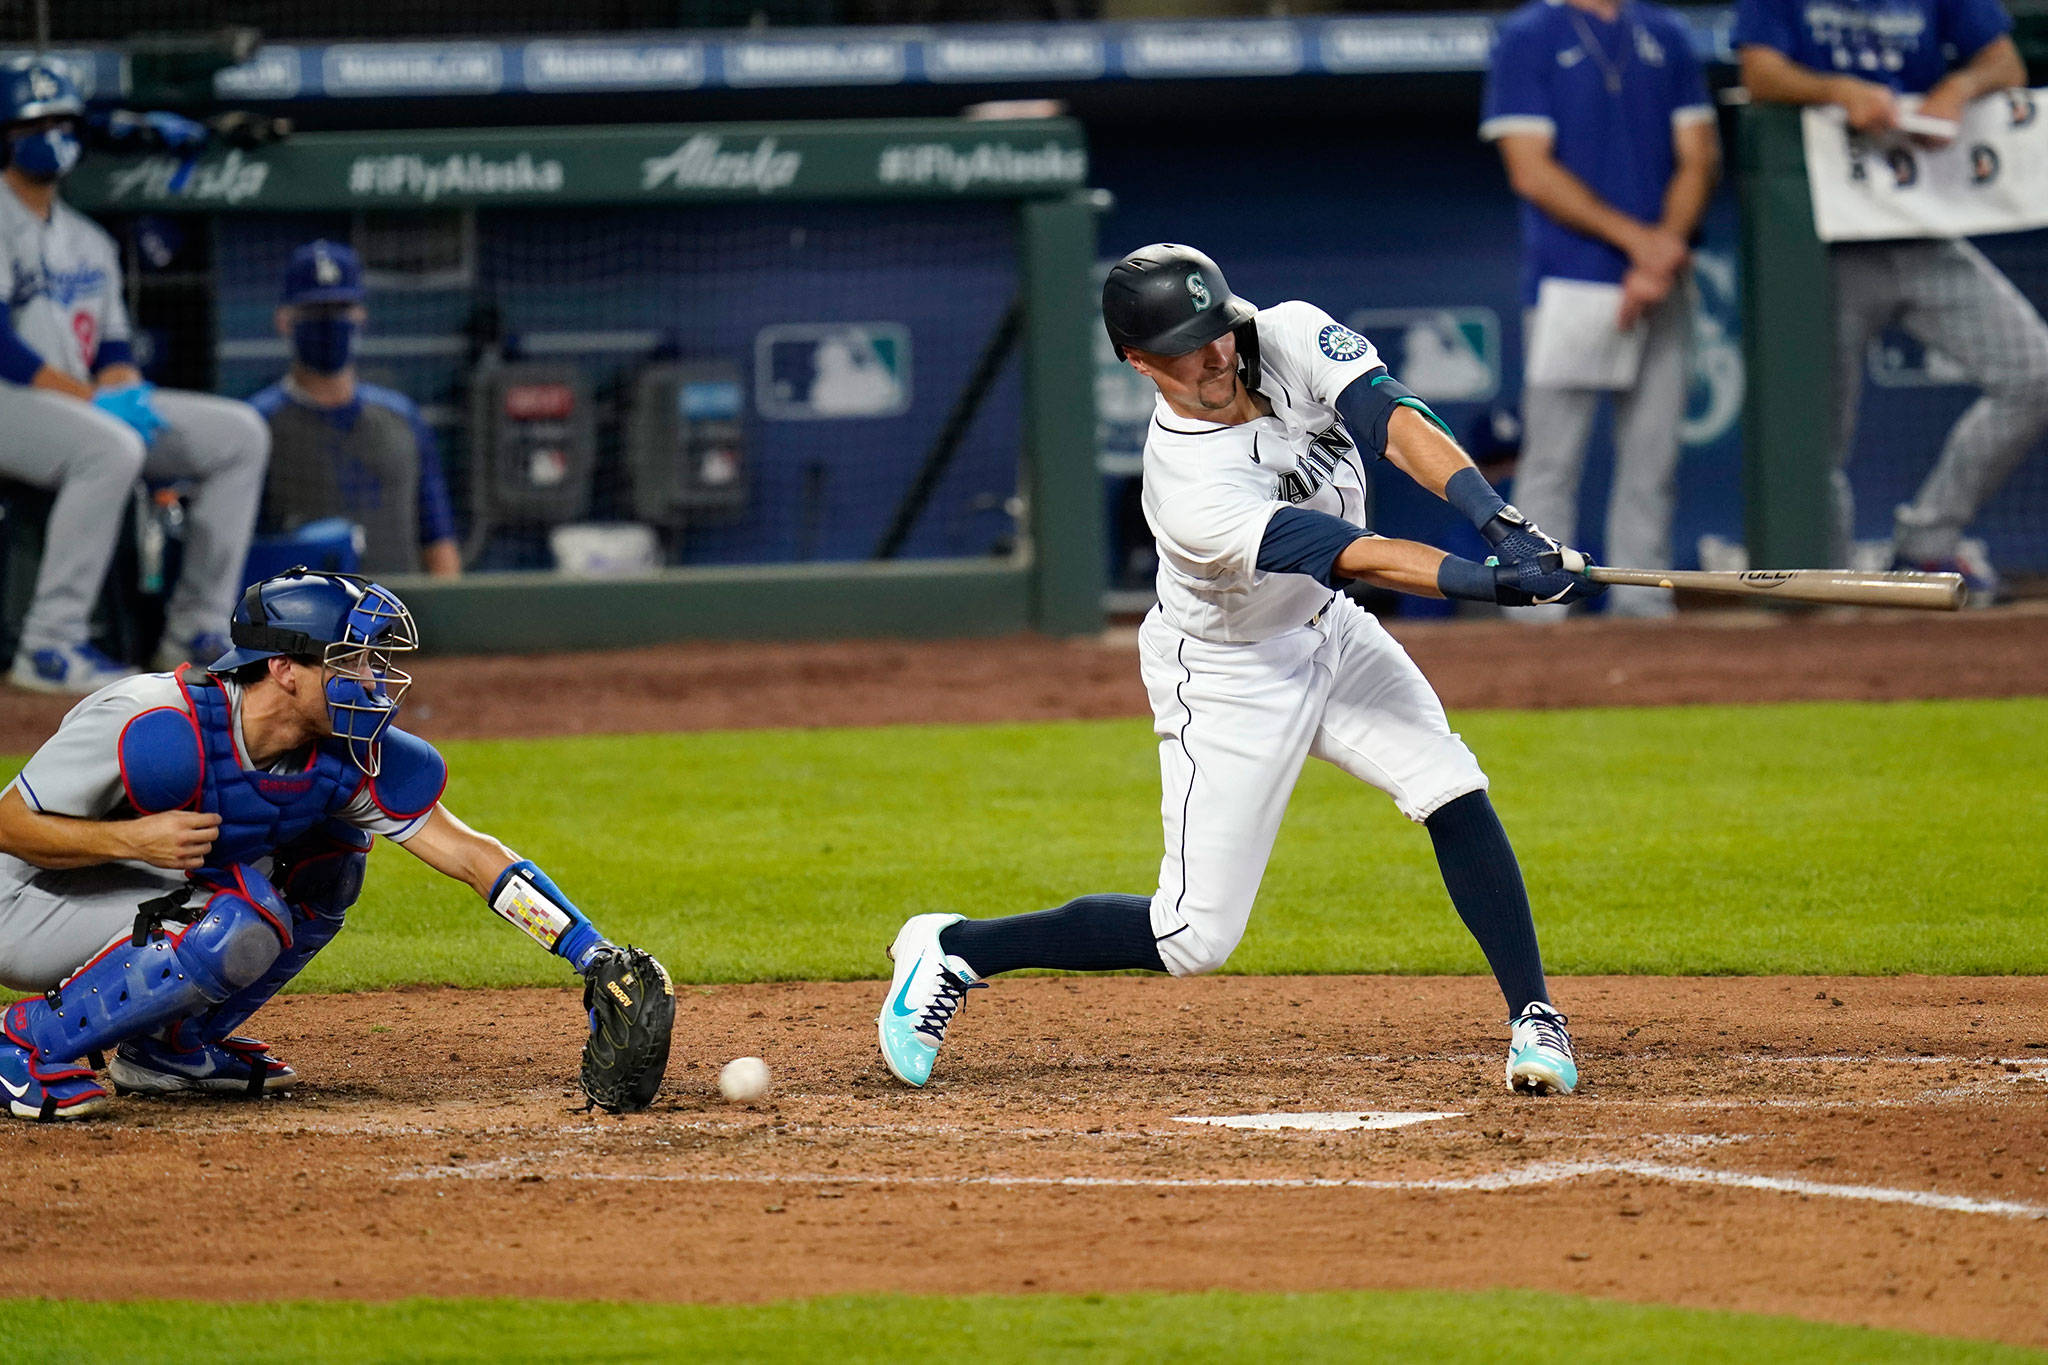 The Mariners’ Braden Bishop swings and misses as Dodgers catcher Austin Barnes reaches for the ball to end the seventh inning of a game Aug. 20, 2020, in Seattle. (AP Photo/Elaine Thompson)